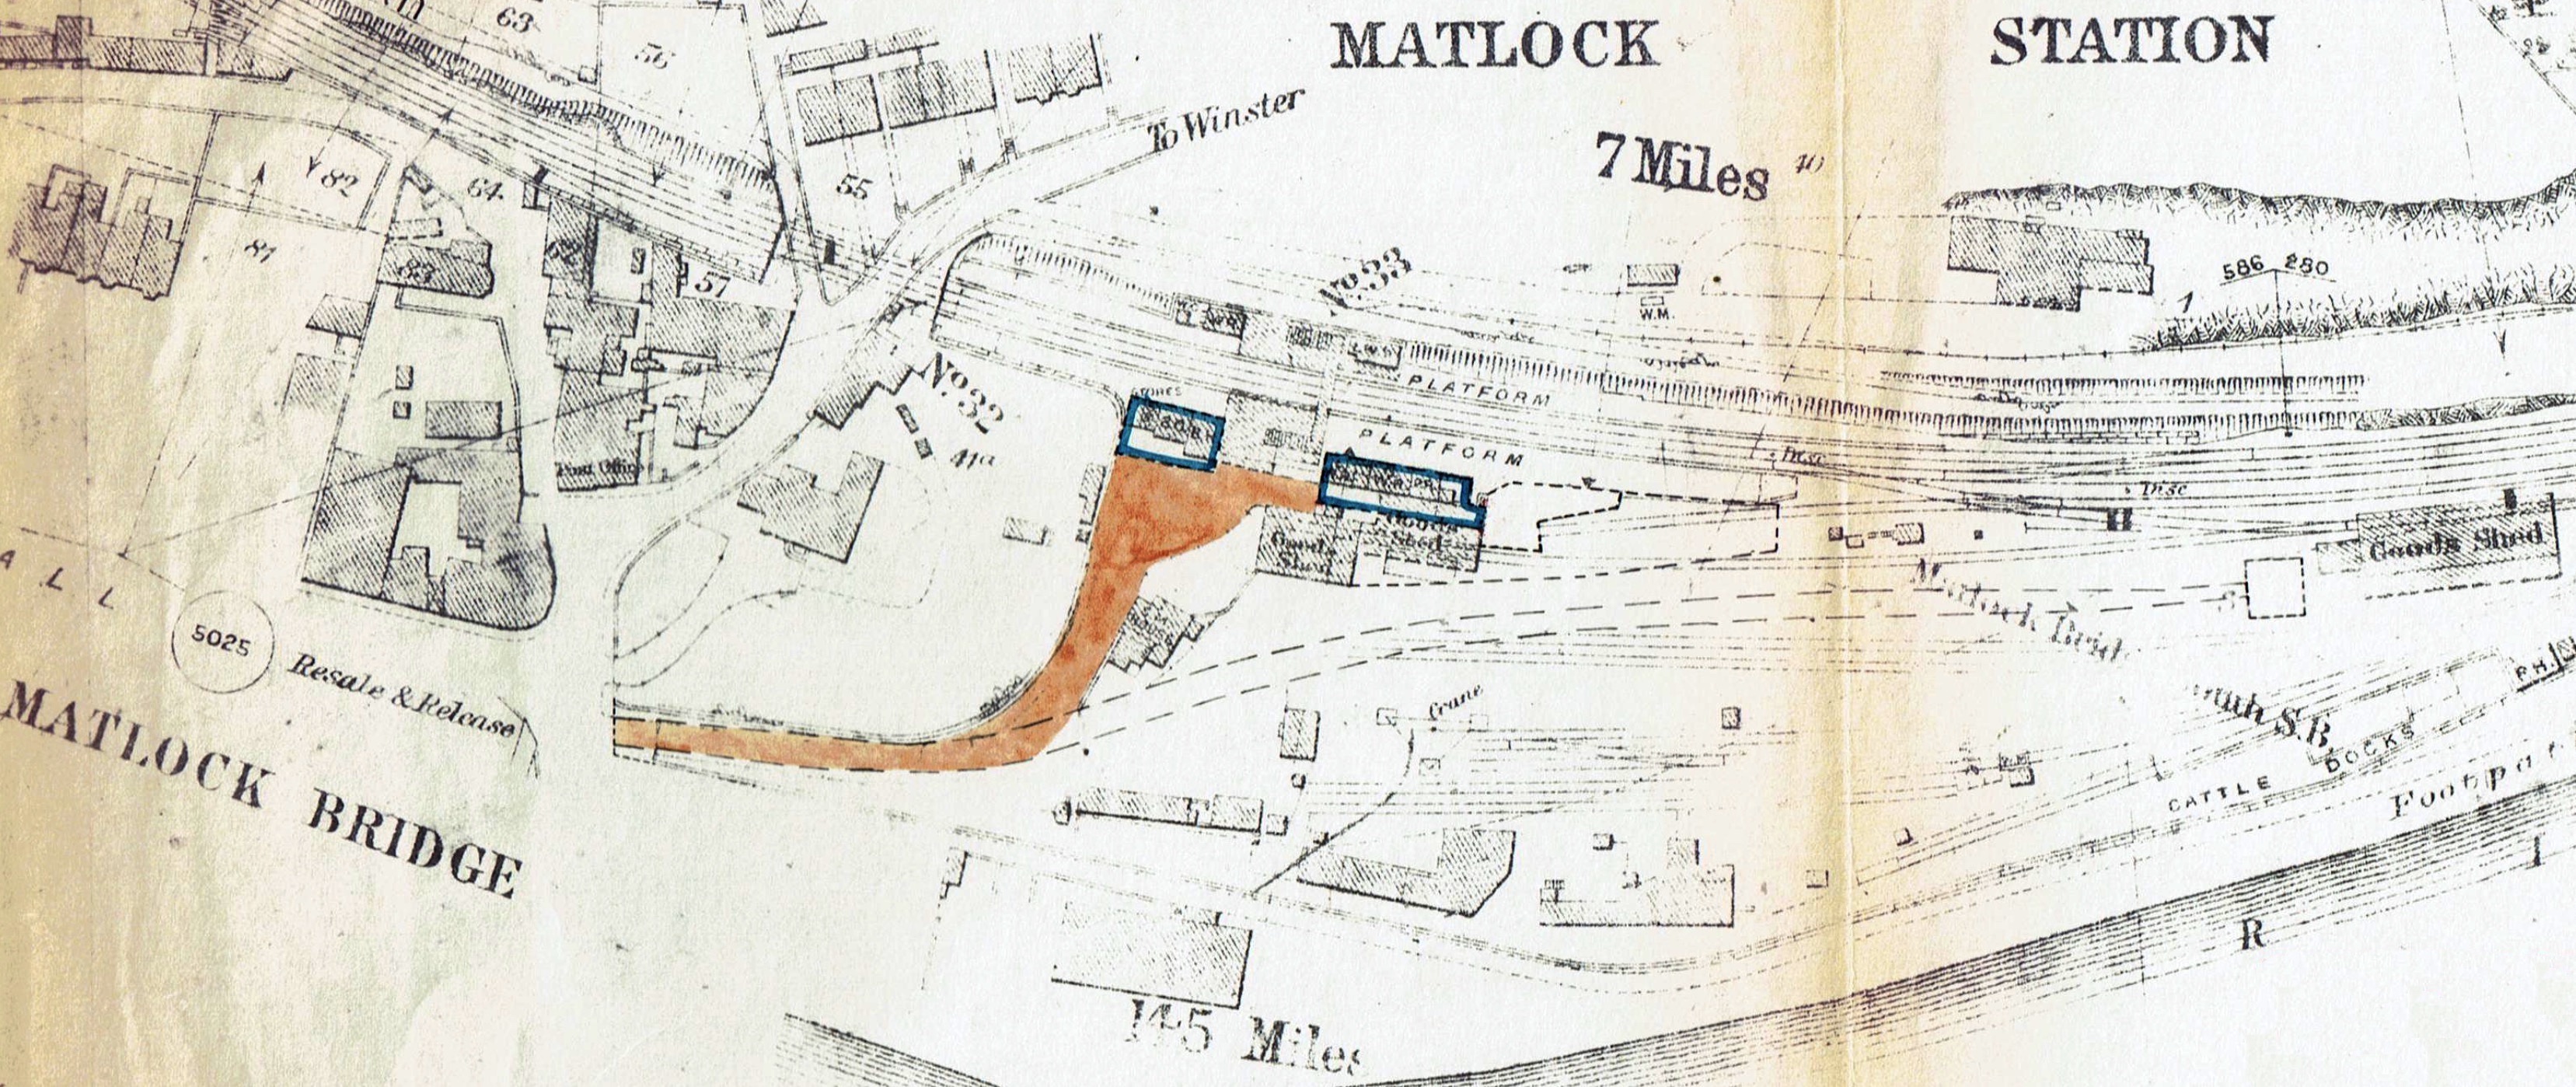 This is a map which shows the location of the photograph at the top of the page